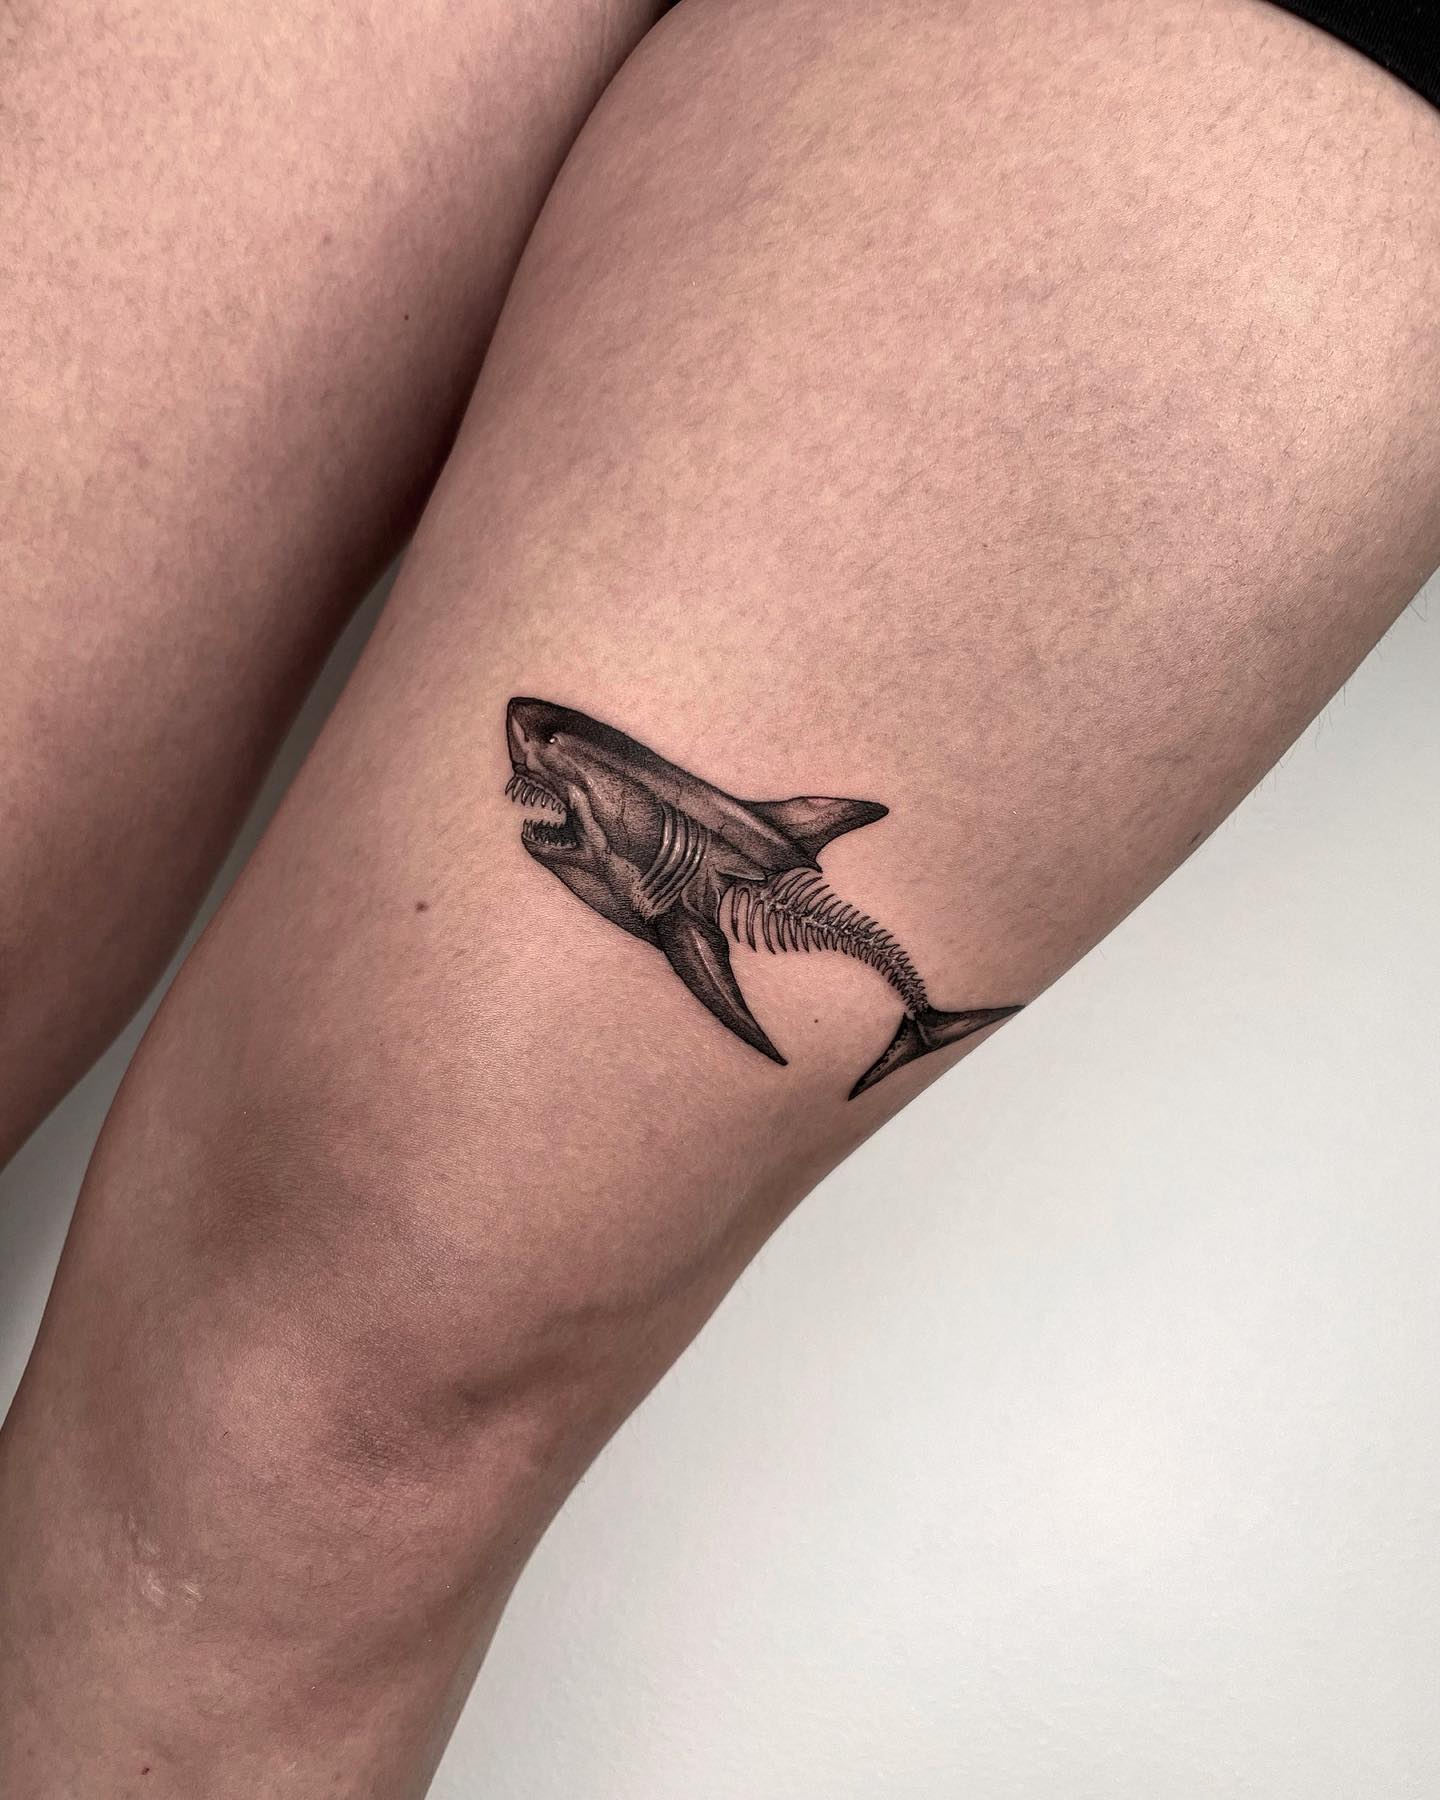 Black and grey style shark tattoo on the left forearm